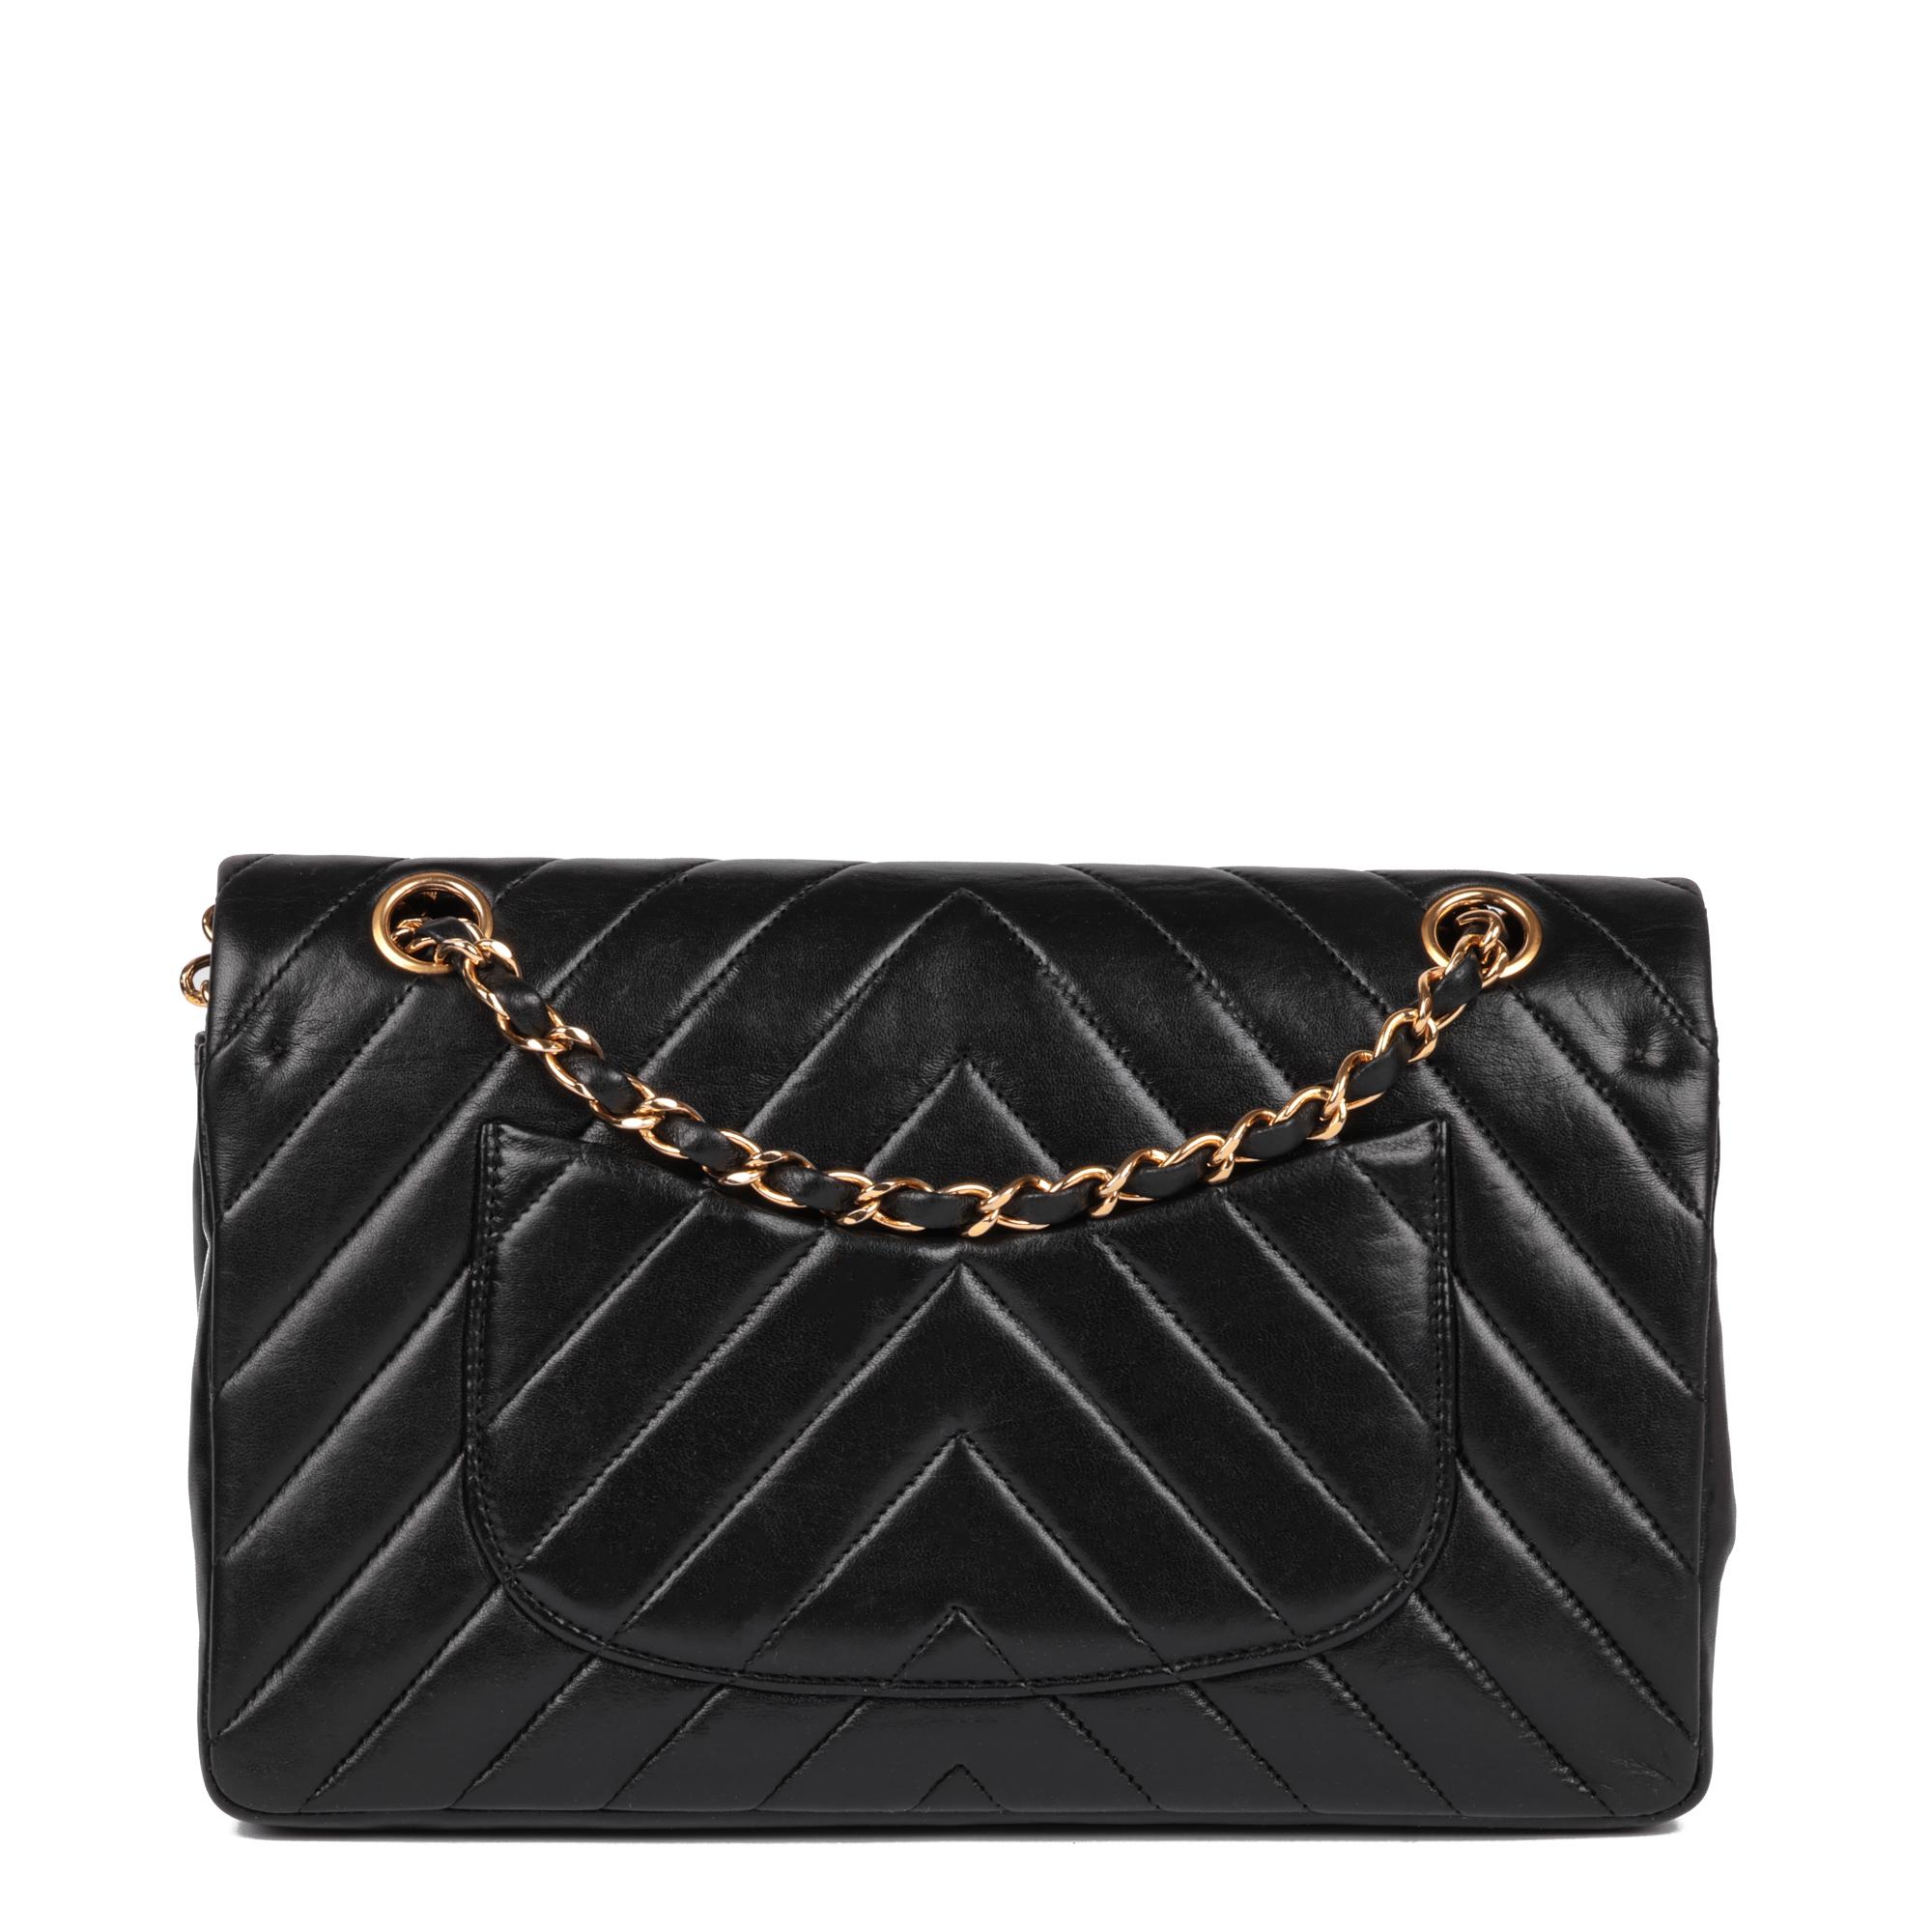 CHANEL Black Chevron Quilted Lambskin Vintage Medium Classic Double Flap Bag For Sale 1